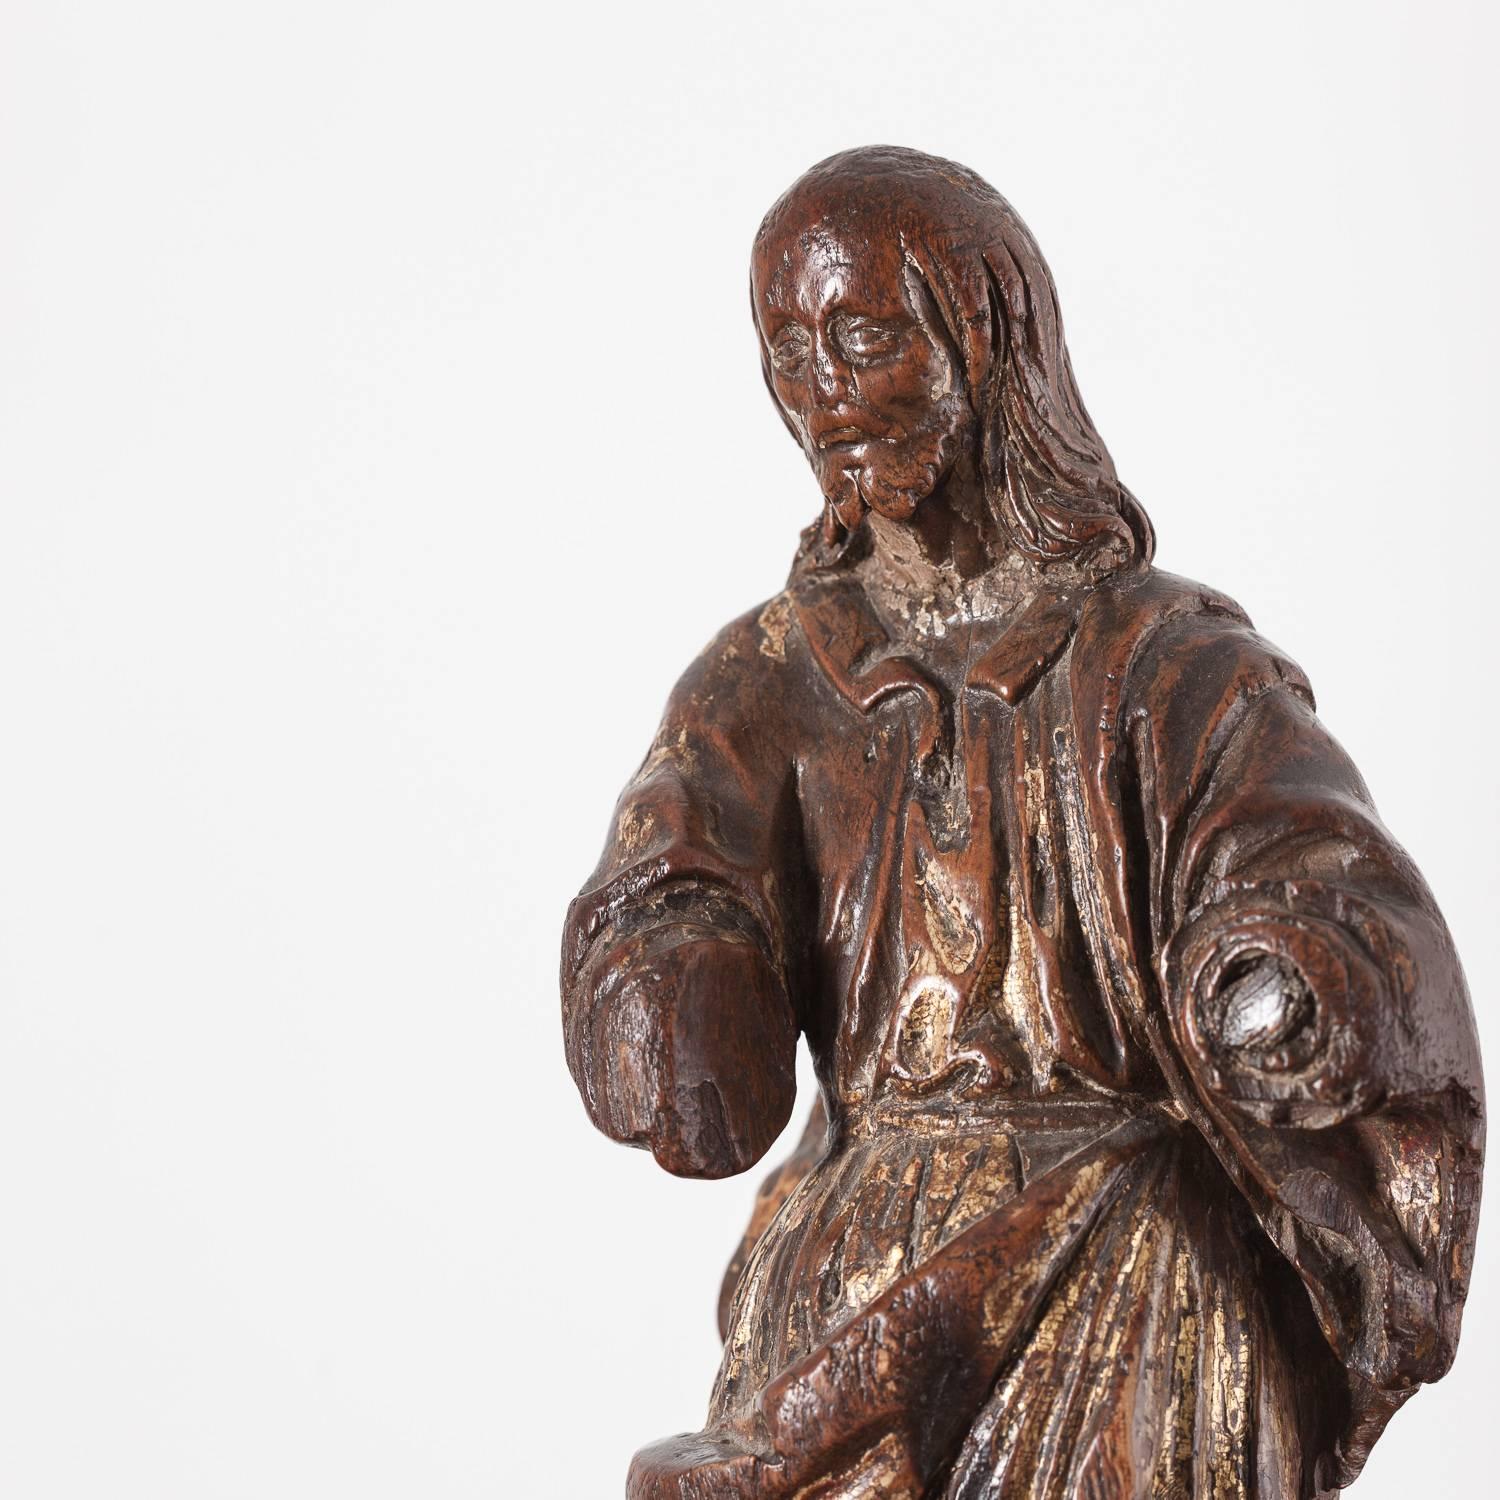 Extremely fine quality 17th century French carved and giltwood figure of Christ, mounted on a later base.

The figure measure 33cm high and 44cm high including the base.